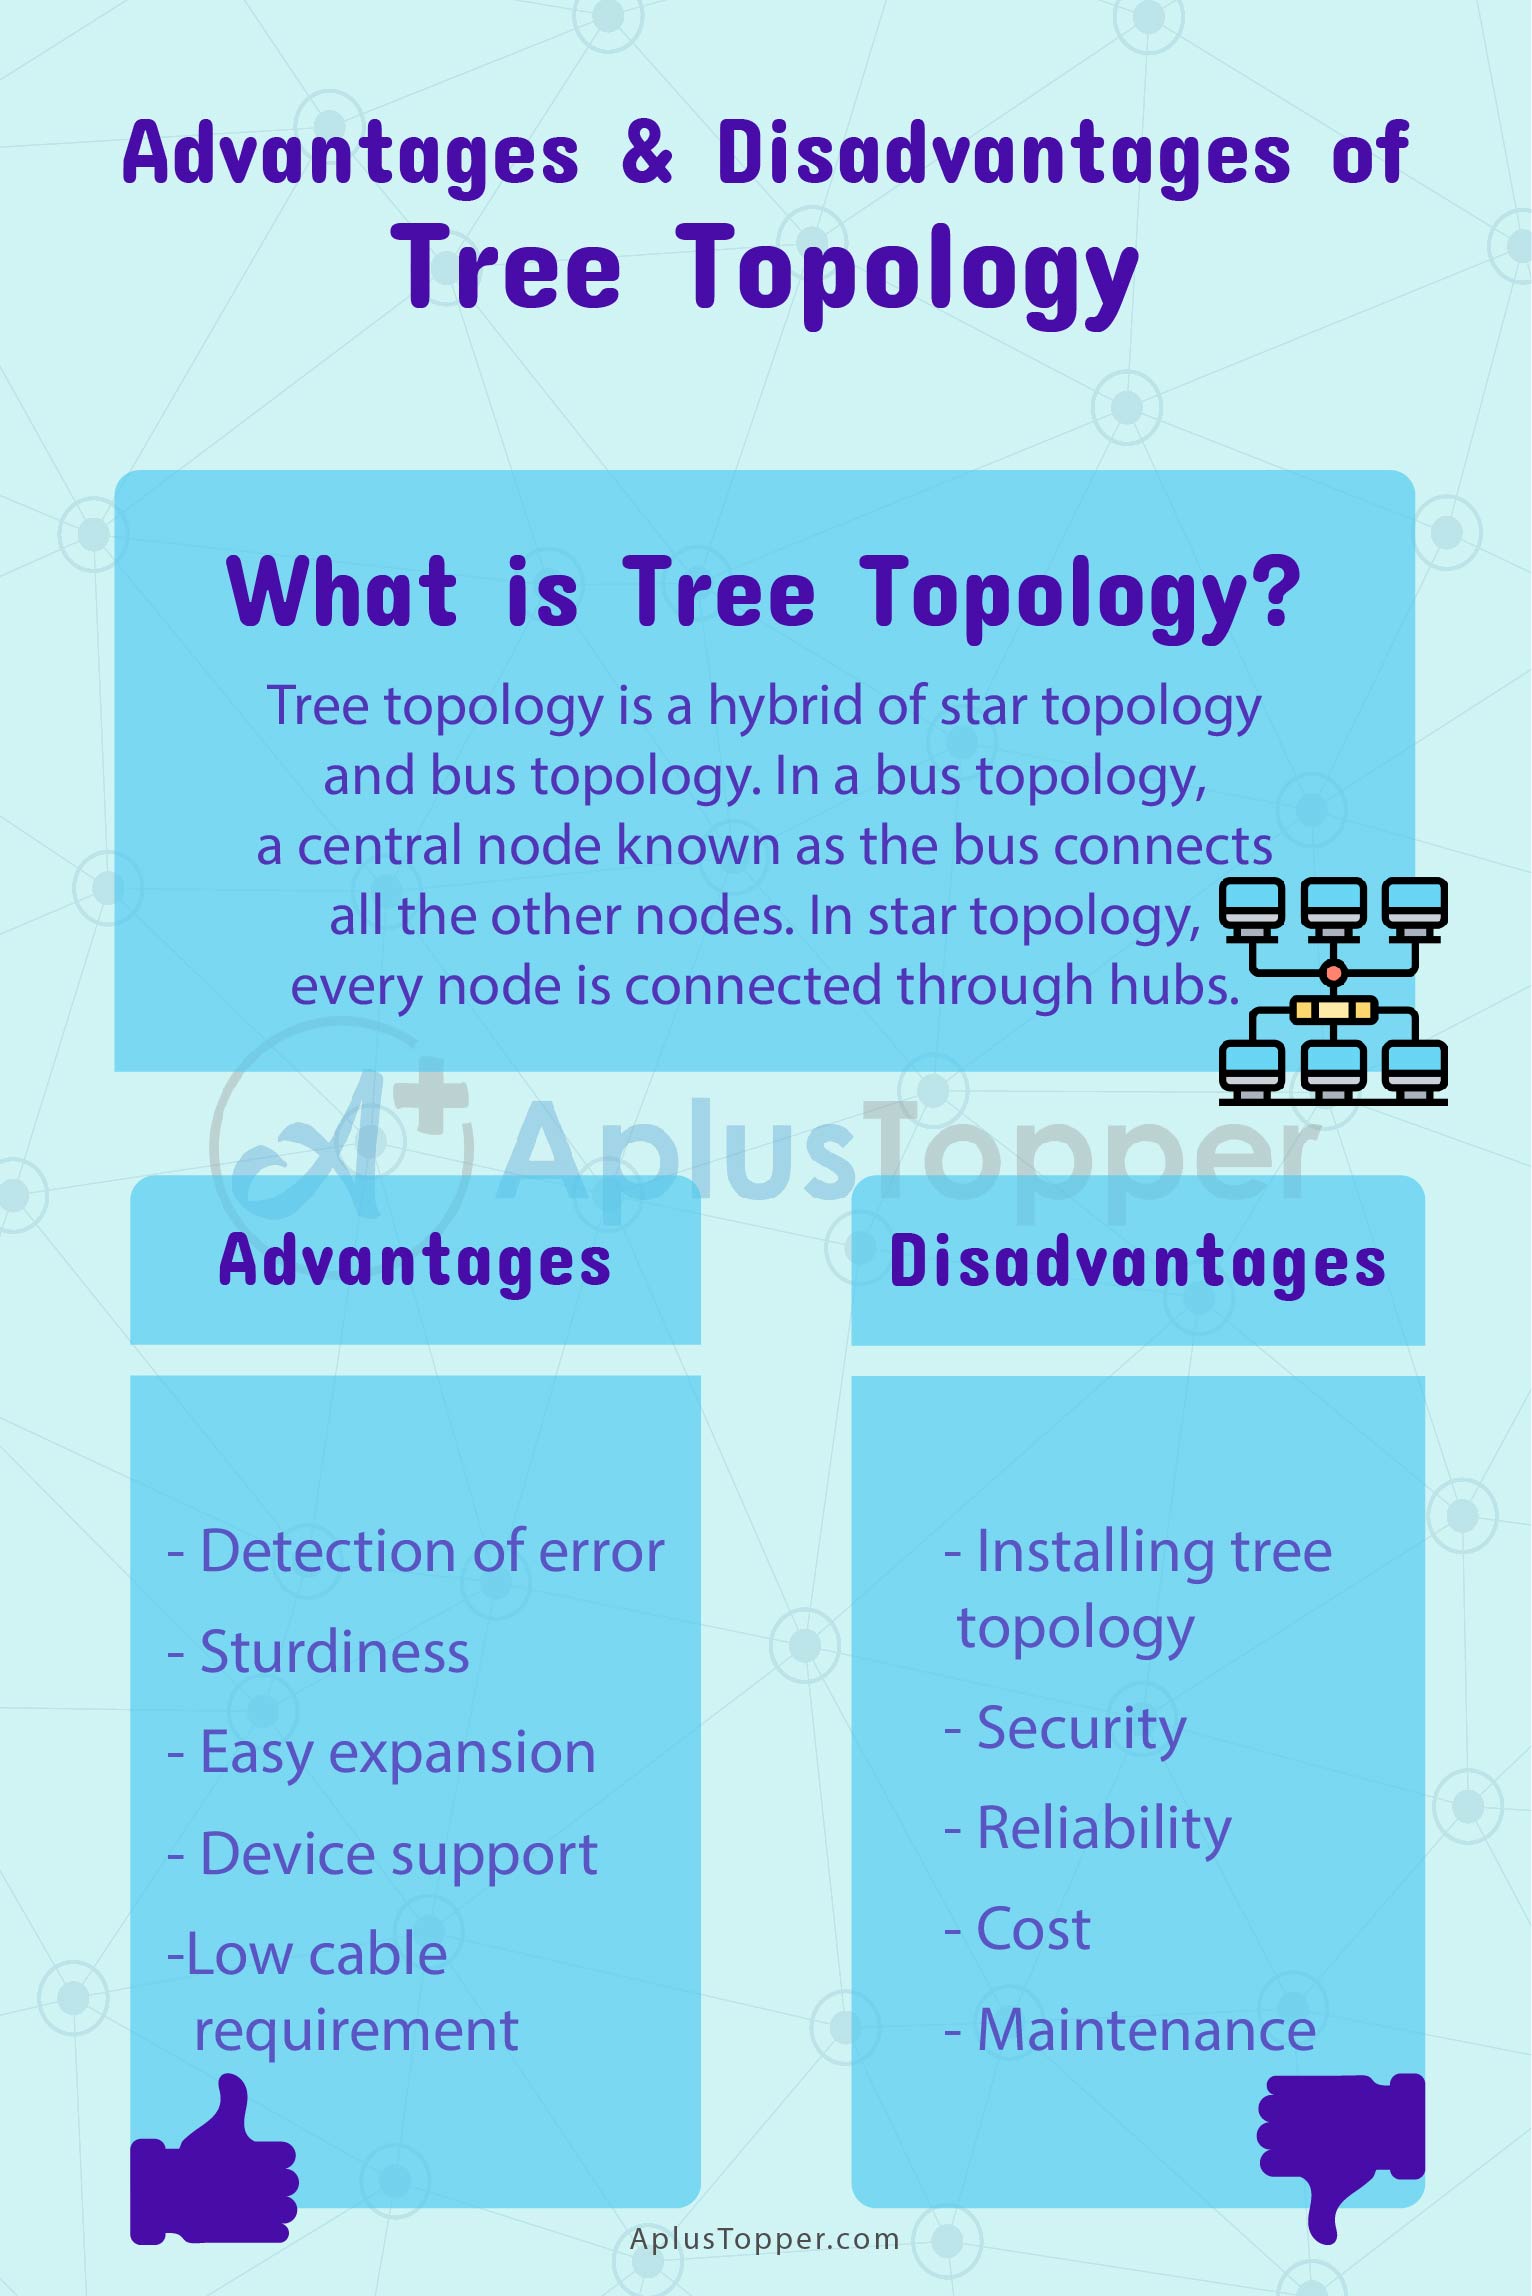 Tree Topology Advantages and Disadvantages 2